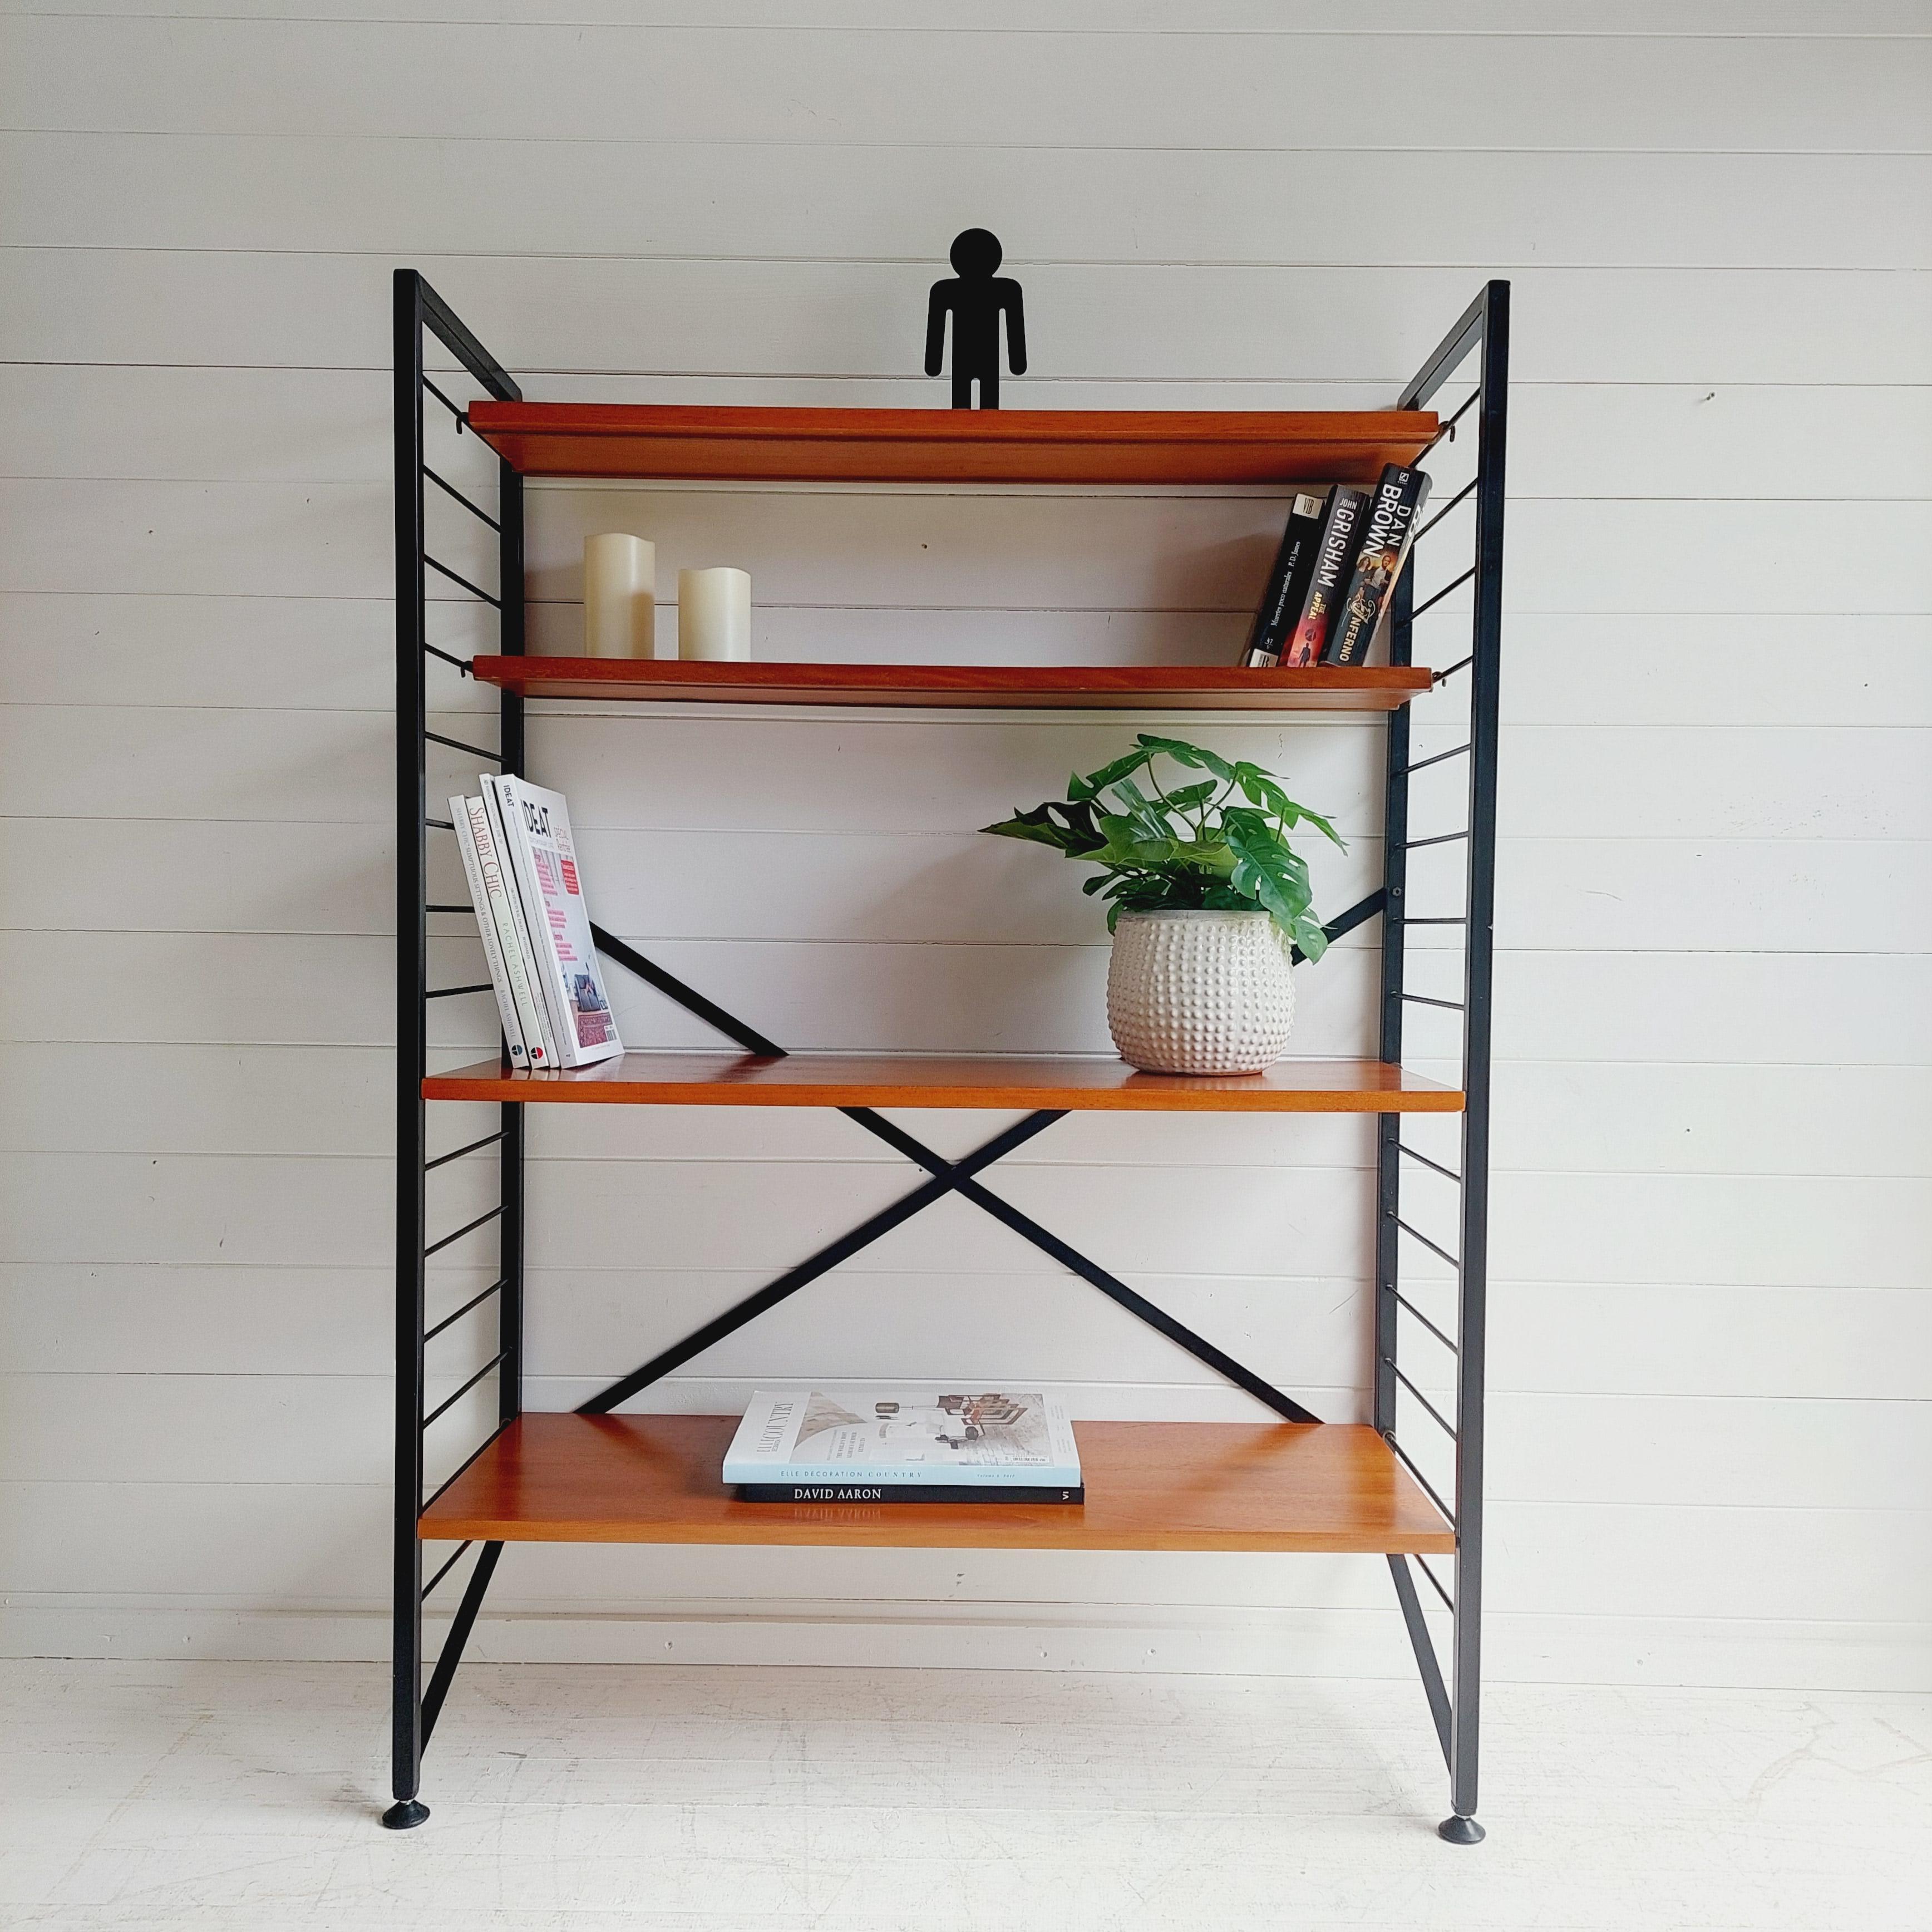 Minimalist design, flexible and functional, 
The classic Staples 'Ladderax' mid century shelving system. 
Designed by Robert Heal and manufactured for Staples of Cricklewood. Circa 1960's.
Single bay of Ladderax shelving unit

Constructed of